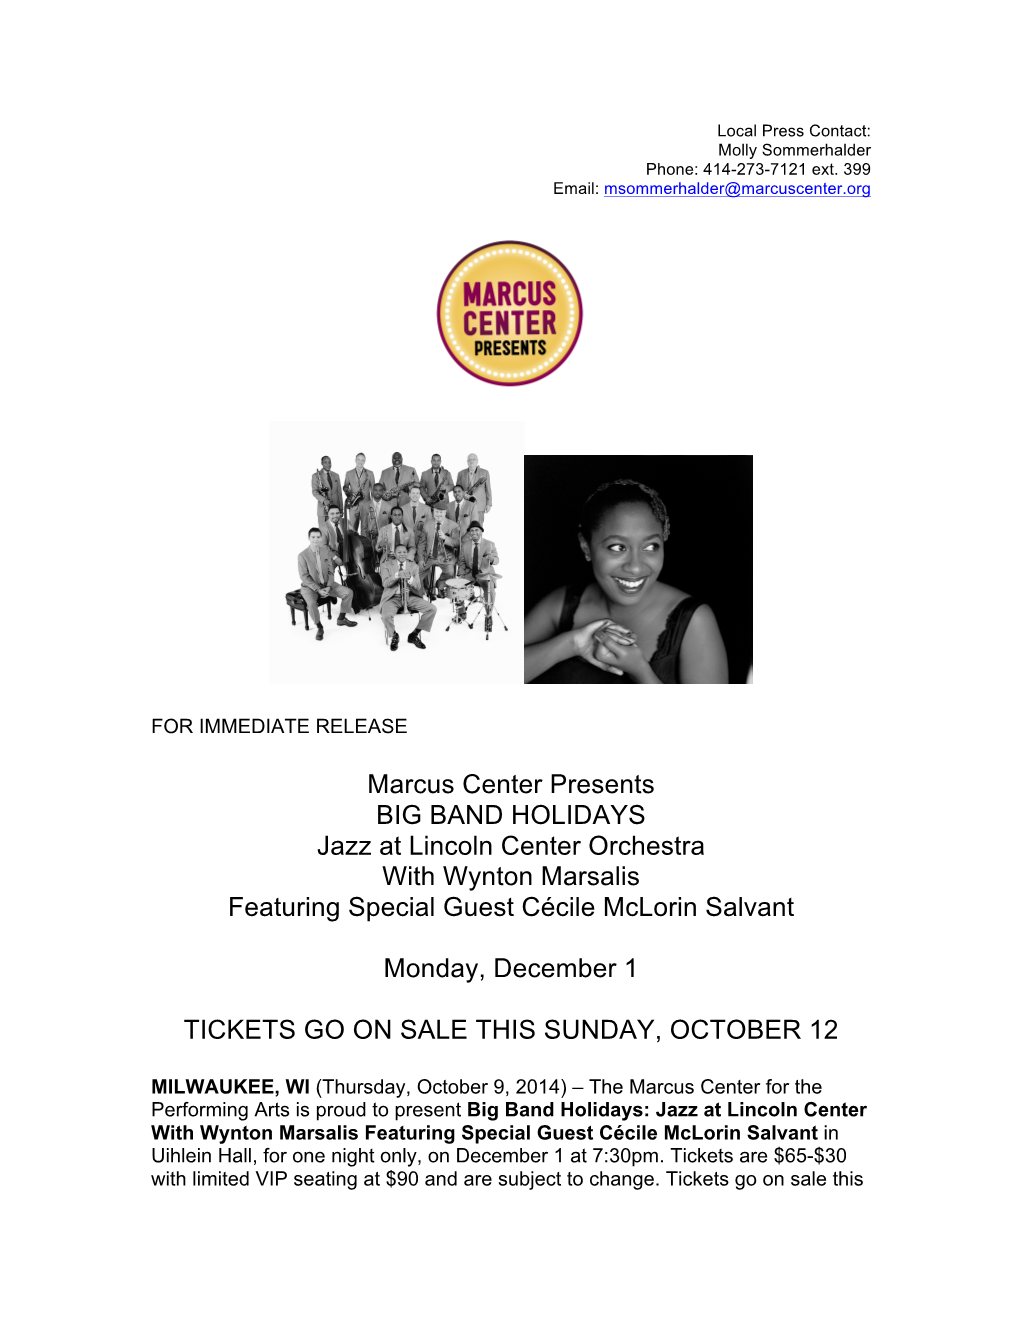 Marcus Center Presents BIG BAND HOLIDAYS Jazz at Lincoln Center Orchestra with Wynton Marsalis Featuring Special Guest Cécile Mclorin Salvant